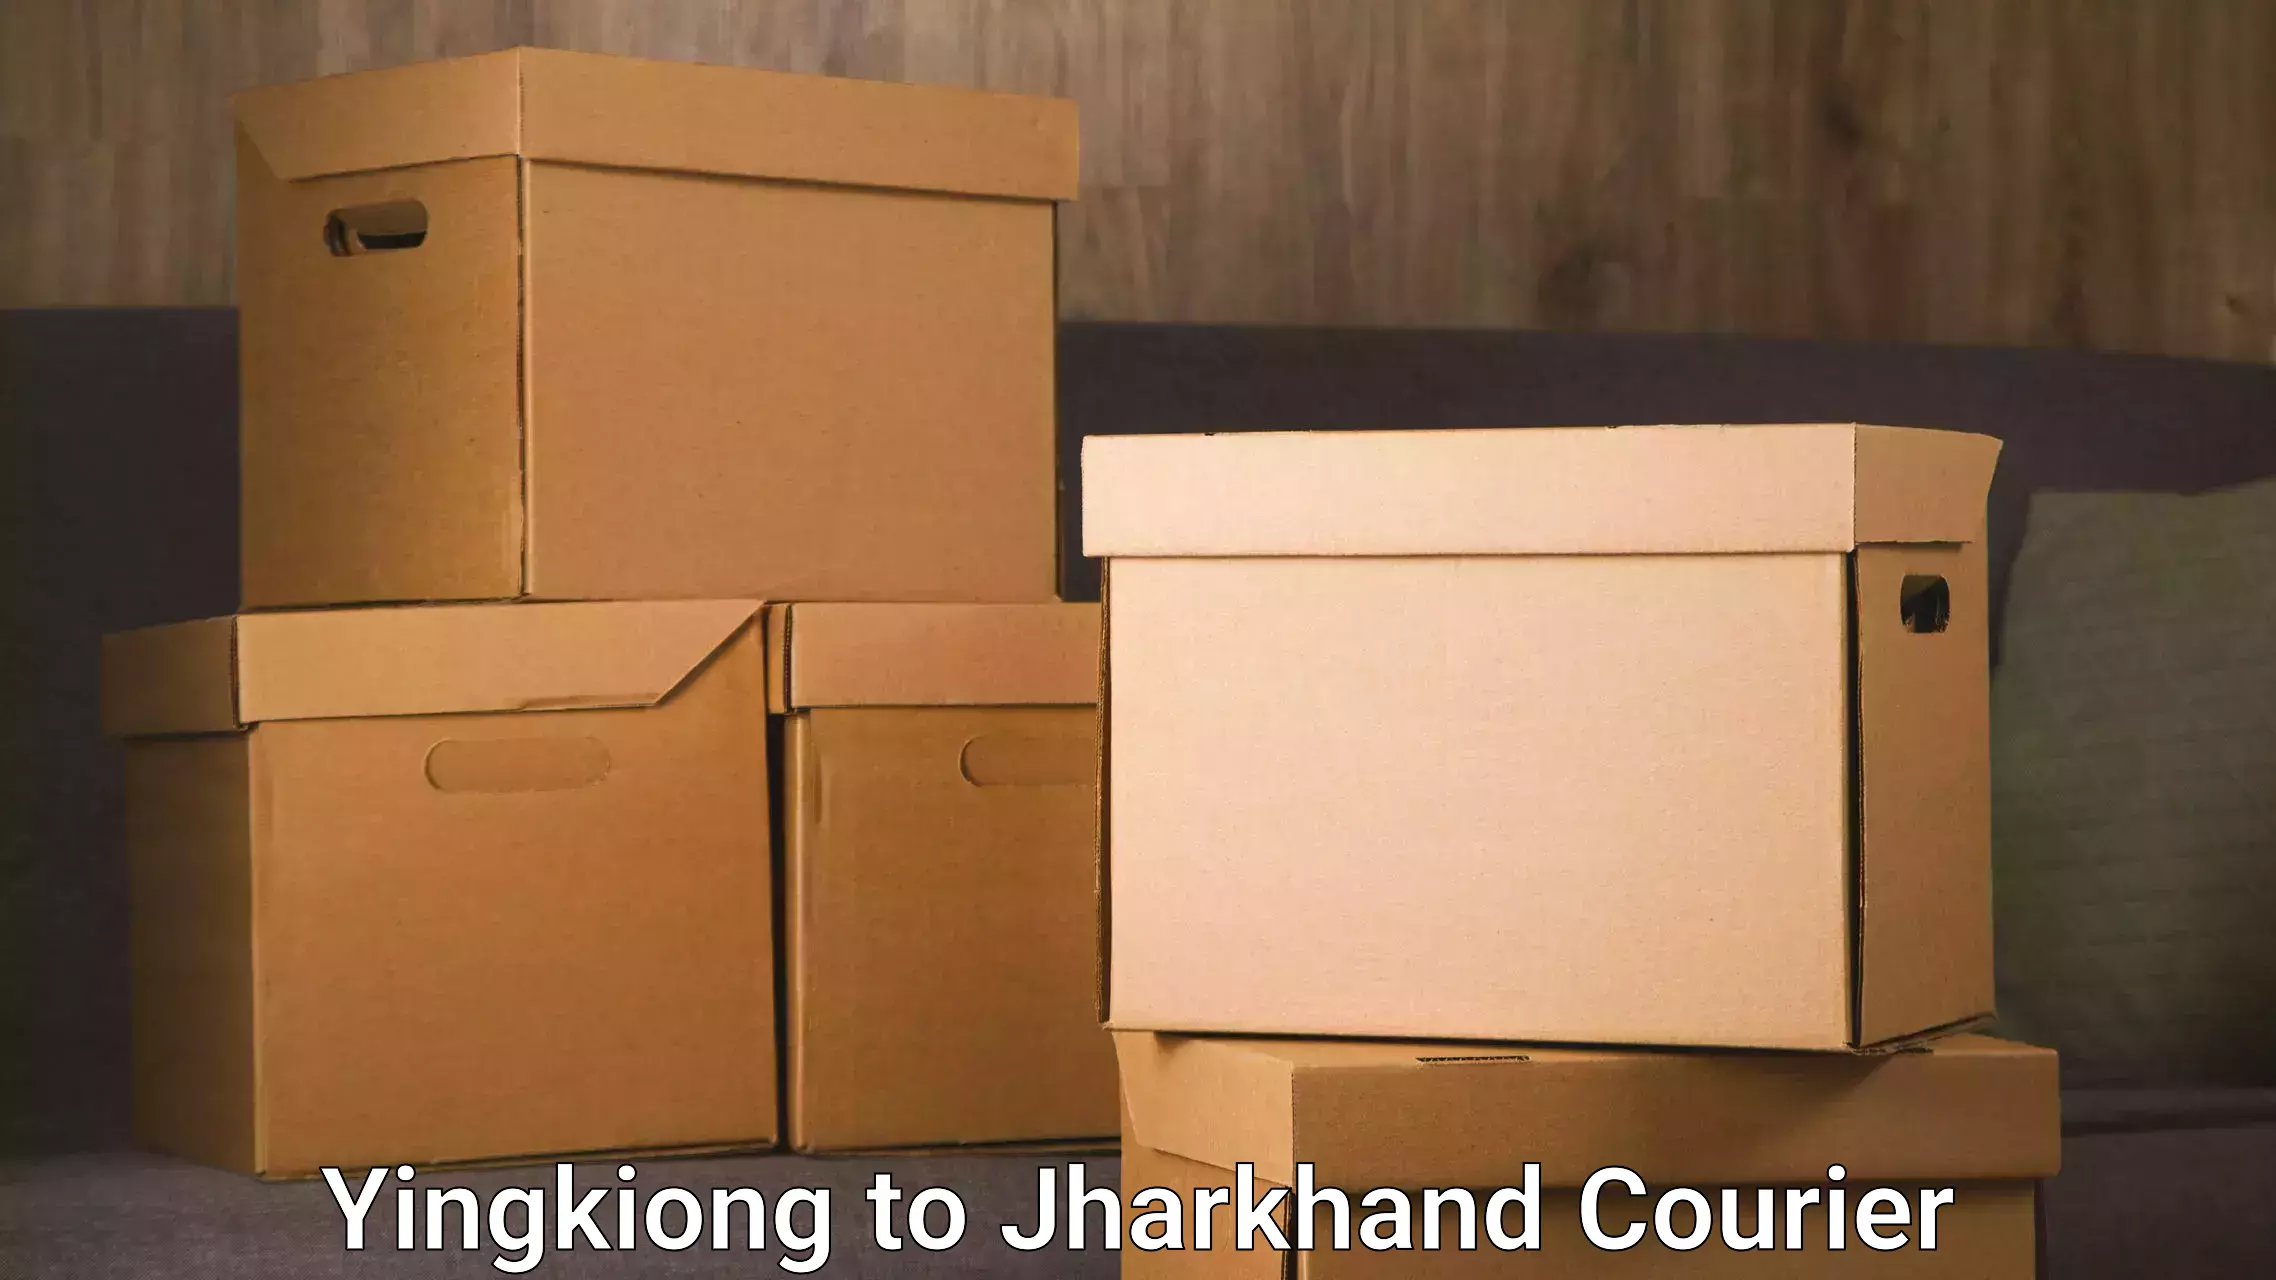 Nationwide shipping coverage Yingkiong to Jharkhand